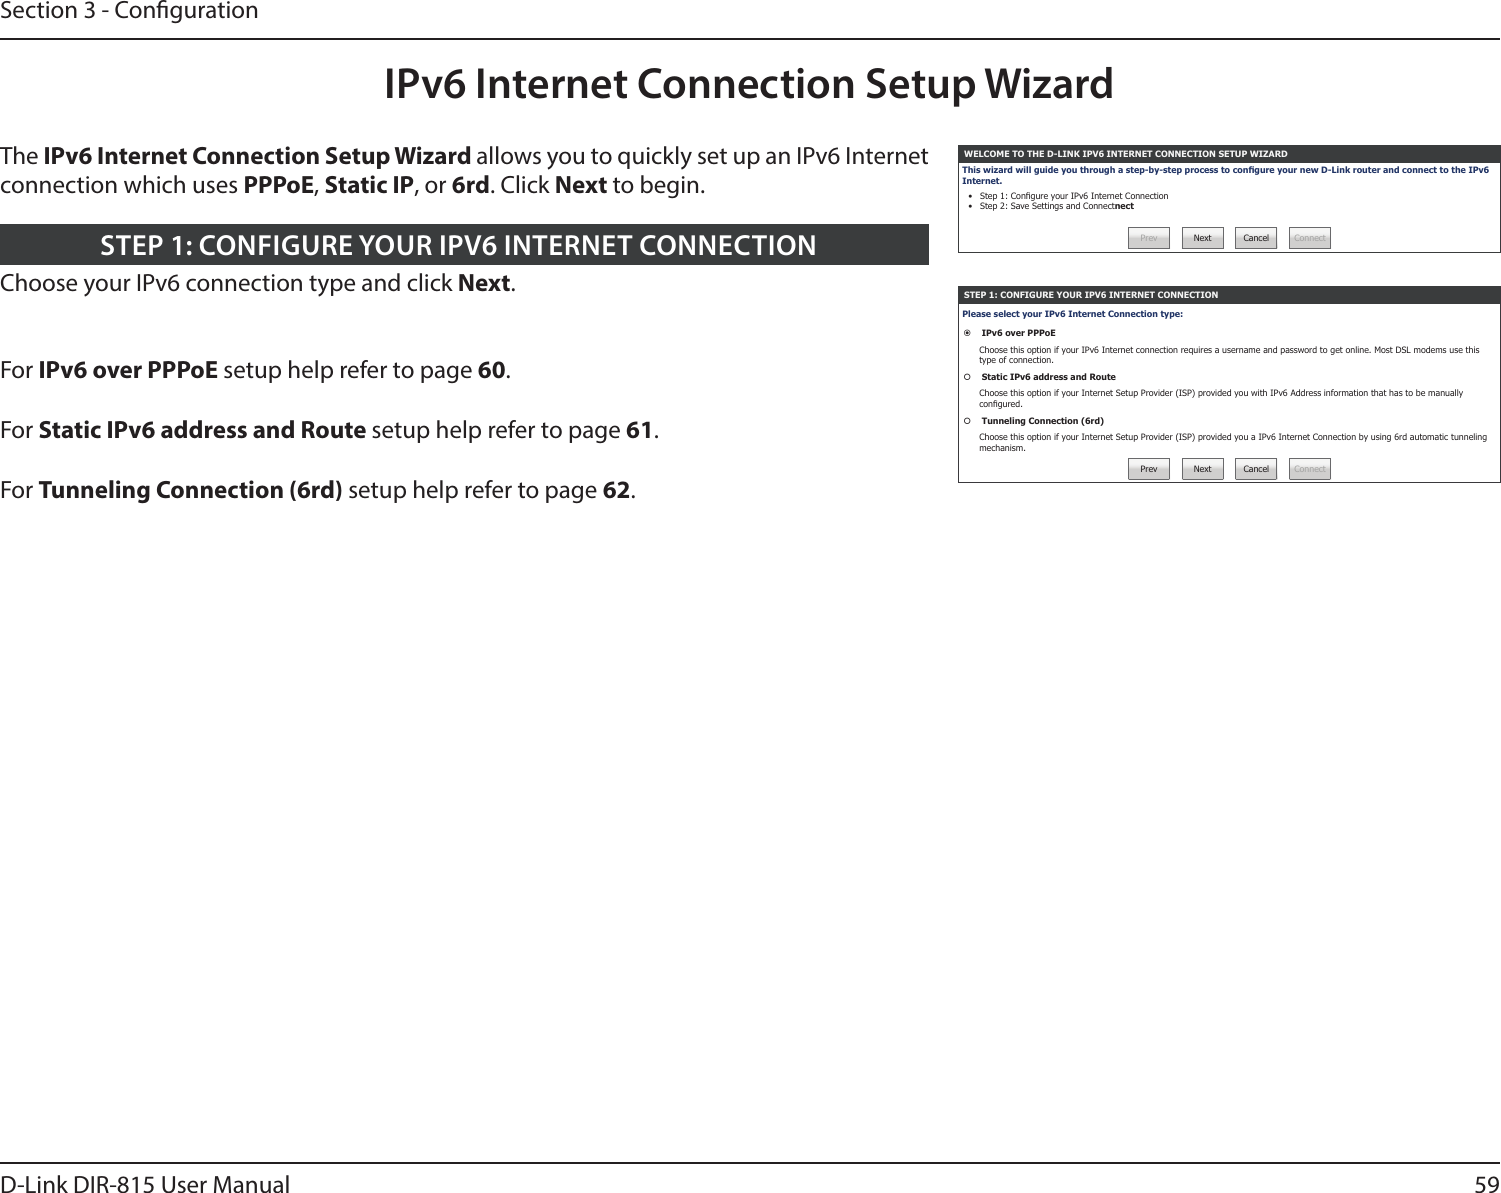 59D-Link DIR-815 User ManualSection 3 - CongurationIPv6 Internet Connection Setup WizardThe IPv6 Internet Connection Setup Wizard allows you to quickly set up an IPv6 Internet connection which uses PPPoE, Static IP, or 6rd. Click Next to begin.WELCOME TO THE D-LINK IPV6 INTERNET CONNECTION SETUP WIZARDThis wizard will guide you through a step-by-step process to congure your new D-Link router and connect to the IPv6 Internet.•  Step 1: Congure your IPv6 Internet Connection•  Step 2: Save Settings and ConnectnectPrev Next Cancel ConnectSTEP 1: CONFIGURE YOUR IPV6 INTERNET CONNECTIONPlease select your IPv6 Internet Connection type: IPv6 over PPPoEChoose this option if your IPv6 Internet connection requires a username and password to get online. Most DSL modems use this type of connection. Static IPv6 address and RouteChoose this option if your Internet Setup Provider (ISP) provided you with IPv6 Address information that has to be manually congured. Tunneling Connection (6rd)Choose this option if your Internet Setup Provider (ISP) provided you a IPv6 Internet Connection by using 6rd automatic tunneling mechanism.Prev Next Cancel ConnectChoose your IPv6 connection type and click Next.STEP 1: CONFIGURE YOUR IPV6 INTERNET CONNECTIONFor IPv6 over PPPoE setup help refer to page 60.For Static IPv6 address and Route setup help refer to page 61.For Tunneling Connection (6rd) setup help refer to page 62.